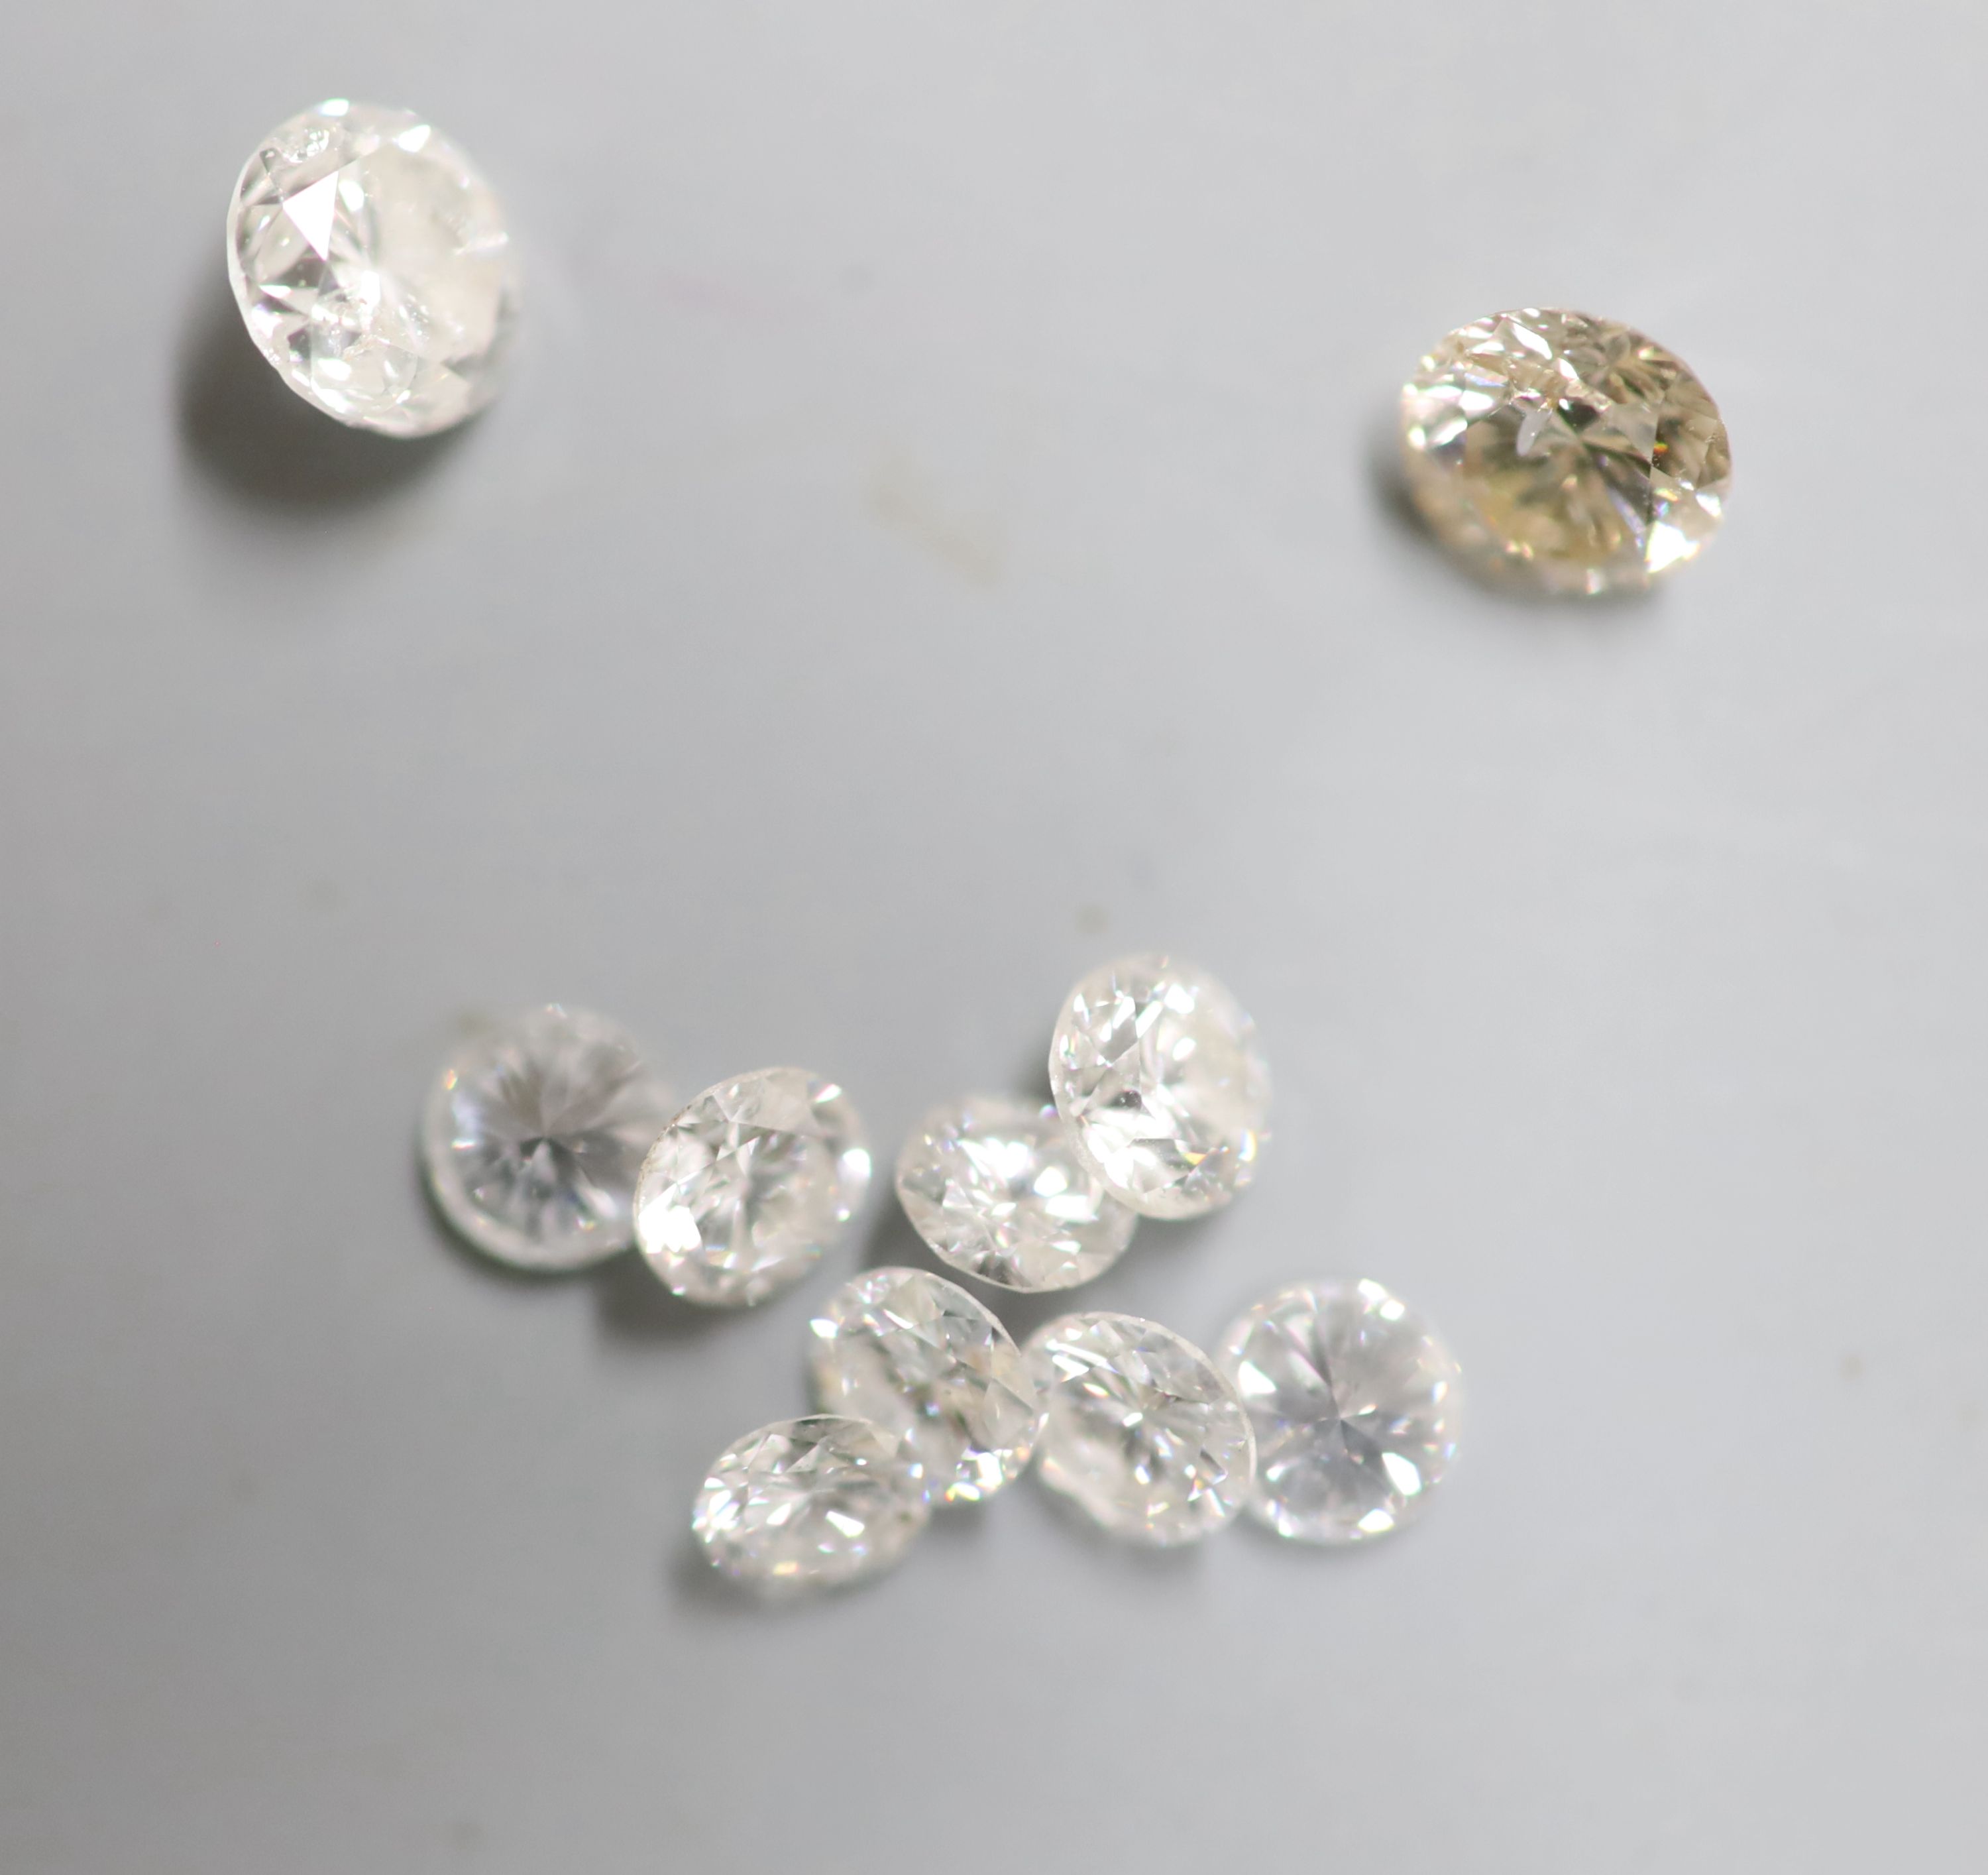 Two unmounted round cut diamonds, weighing 0.28ct and 0.35ct and eight other unmounted round cut diamonds.